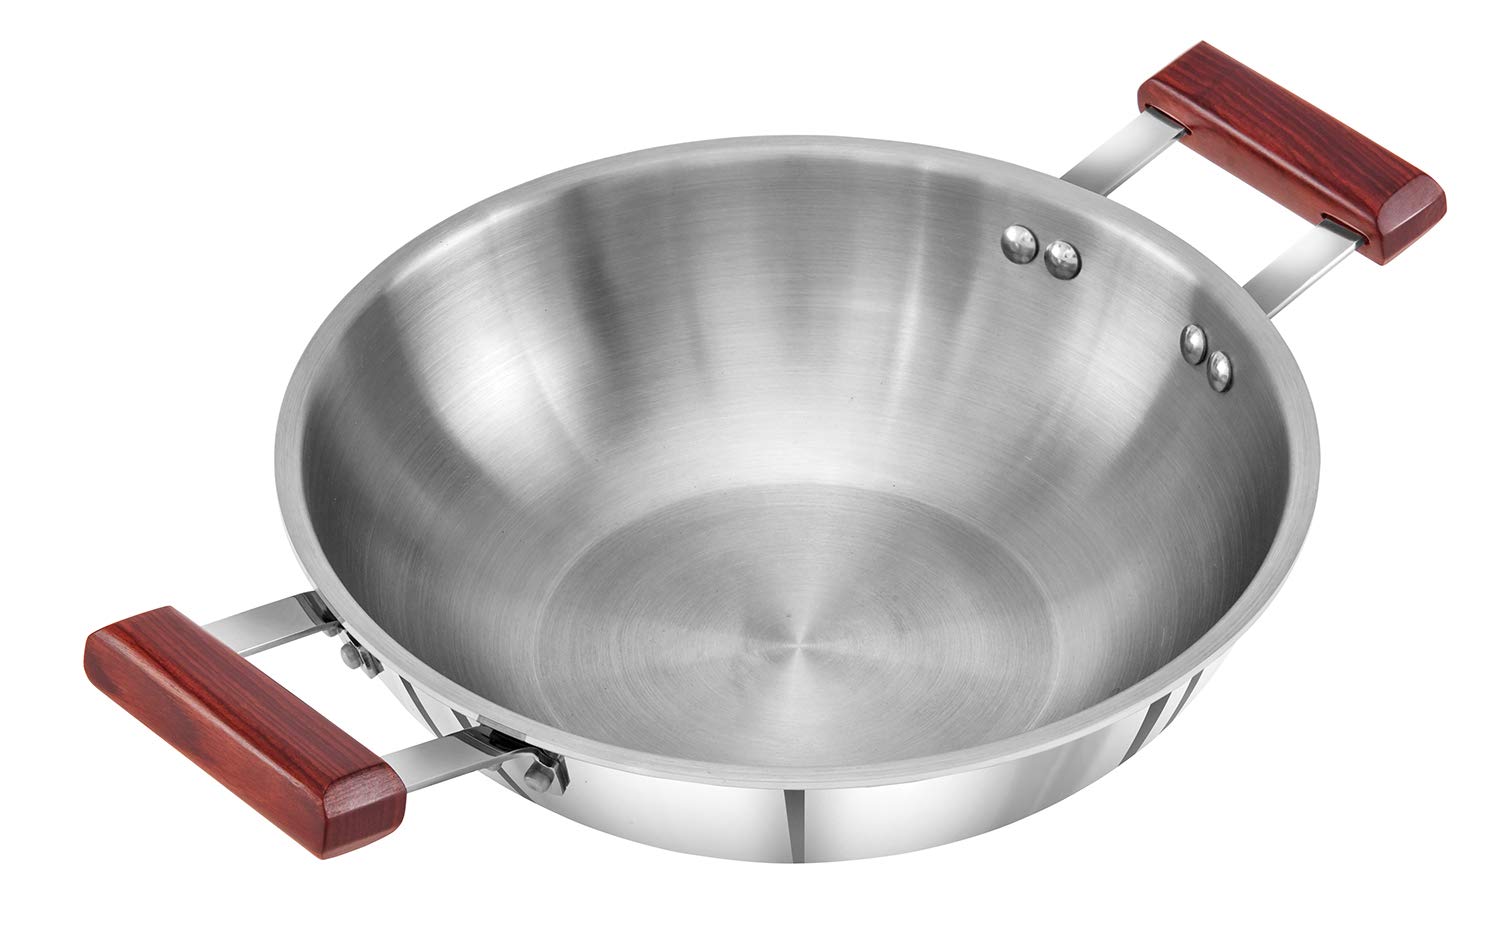 Hawkins Tri-Ply Stainless Steel Induction Compatible Deep-Fry Pan, Capacity 2.5 Litre, Diameter 26 cm, Thickness 3 mm